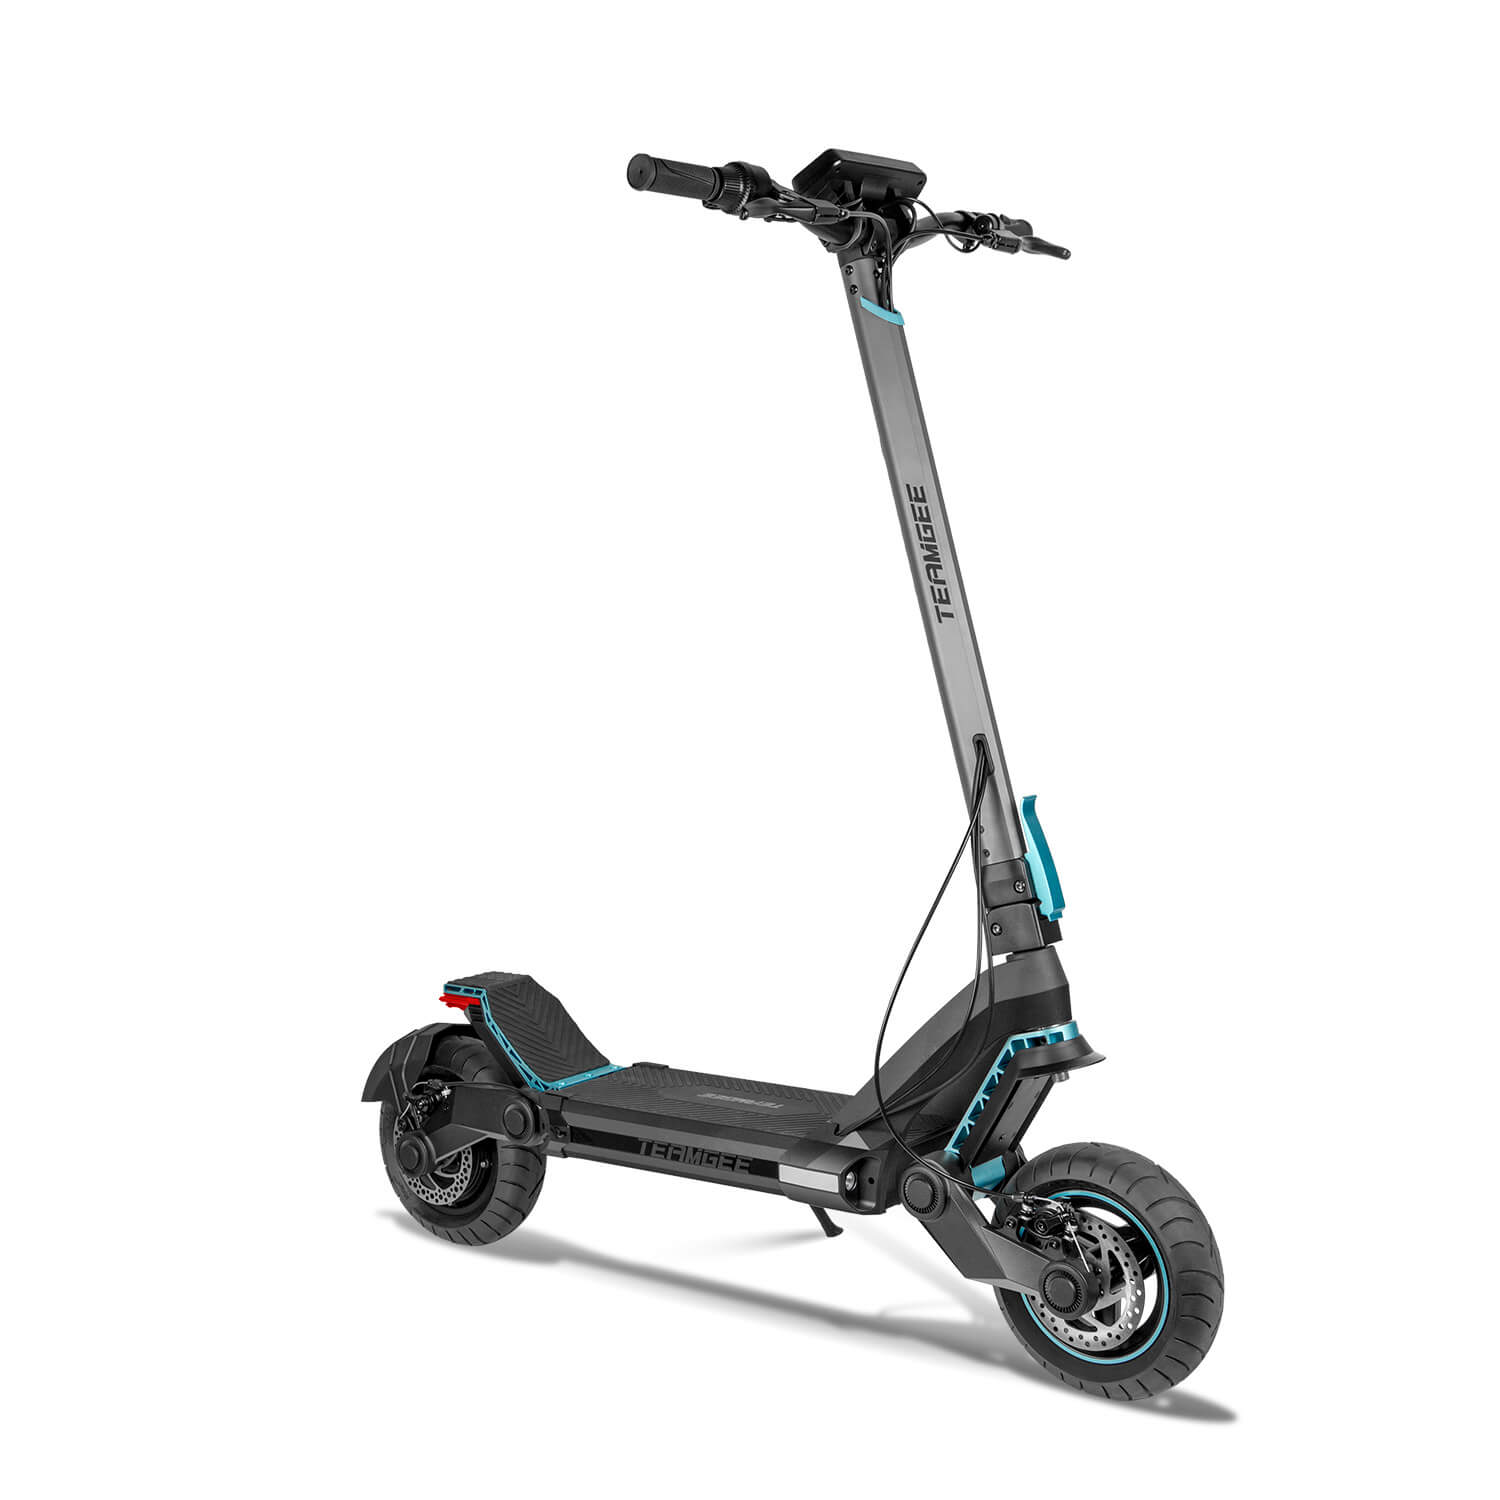 Teamgee G3 Electric Scooter, Best Electric City Scooter with 10-inch Pneumatic Tires